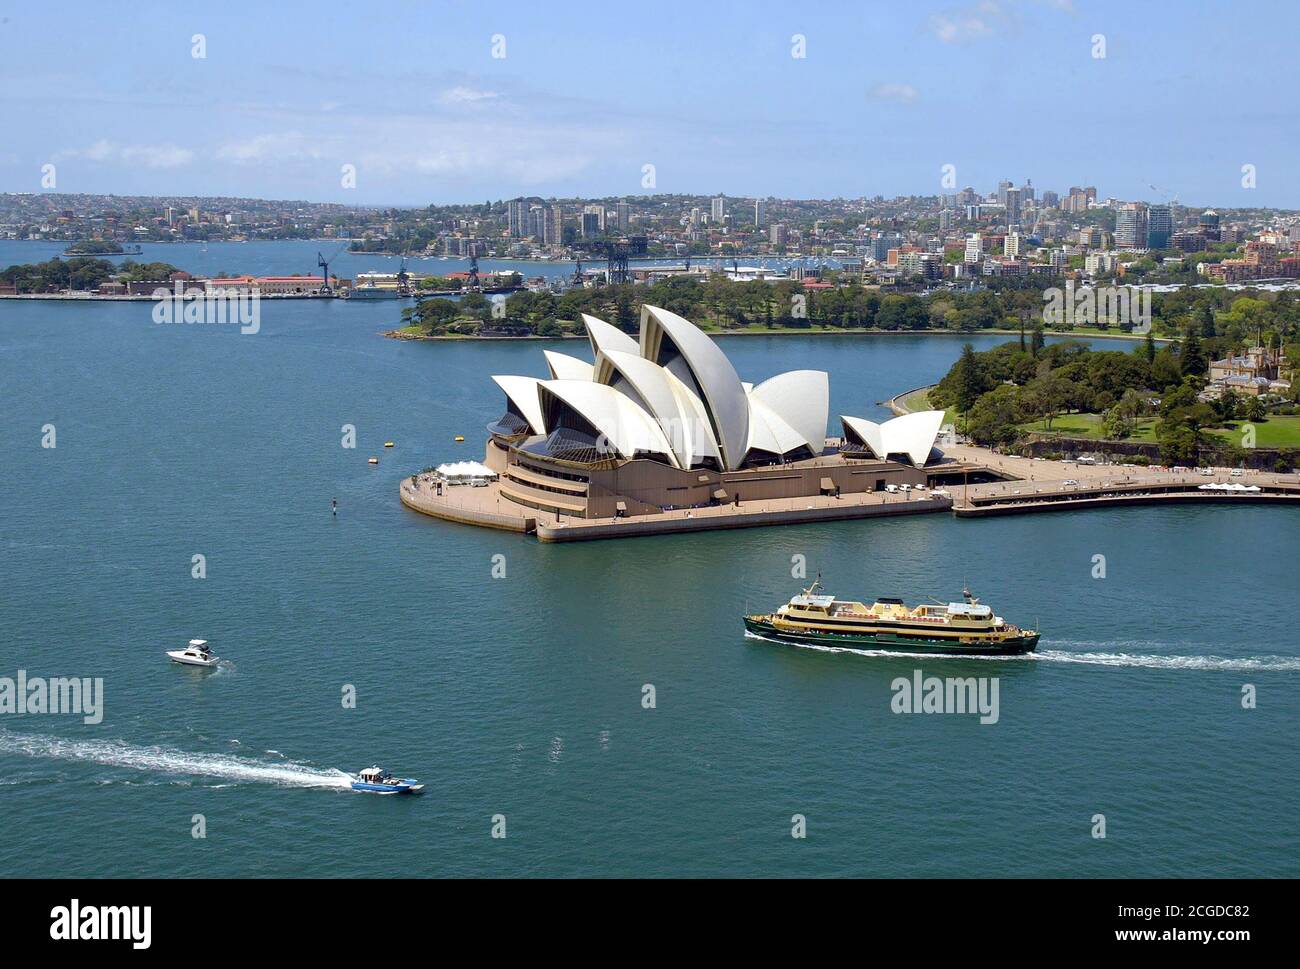 SYDNEY HARBOUR SHOWING THE OPERA HOUSE AND THE MANLY FERRY SYDNEY, AUSTRALIA   PHOTO CREDIT : © MARK PAIN / ALAMY STOCK PHOTO Stock Photo